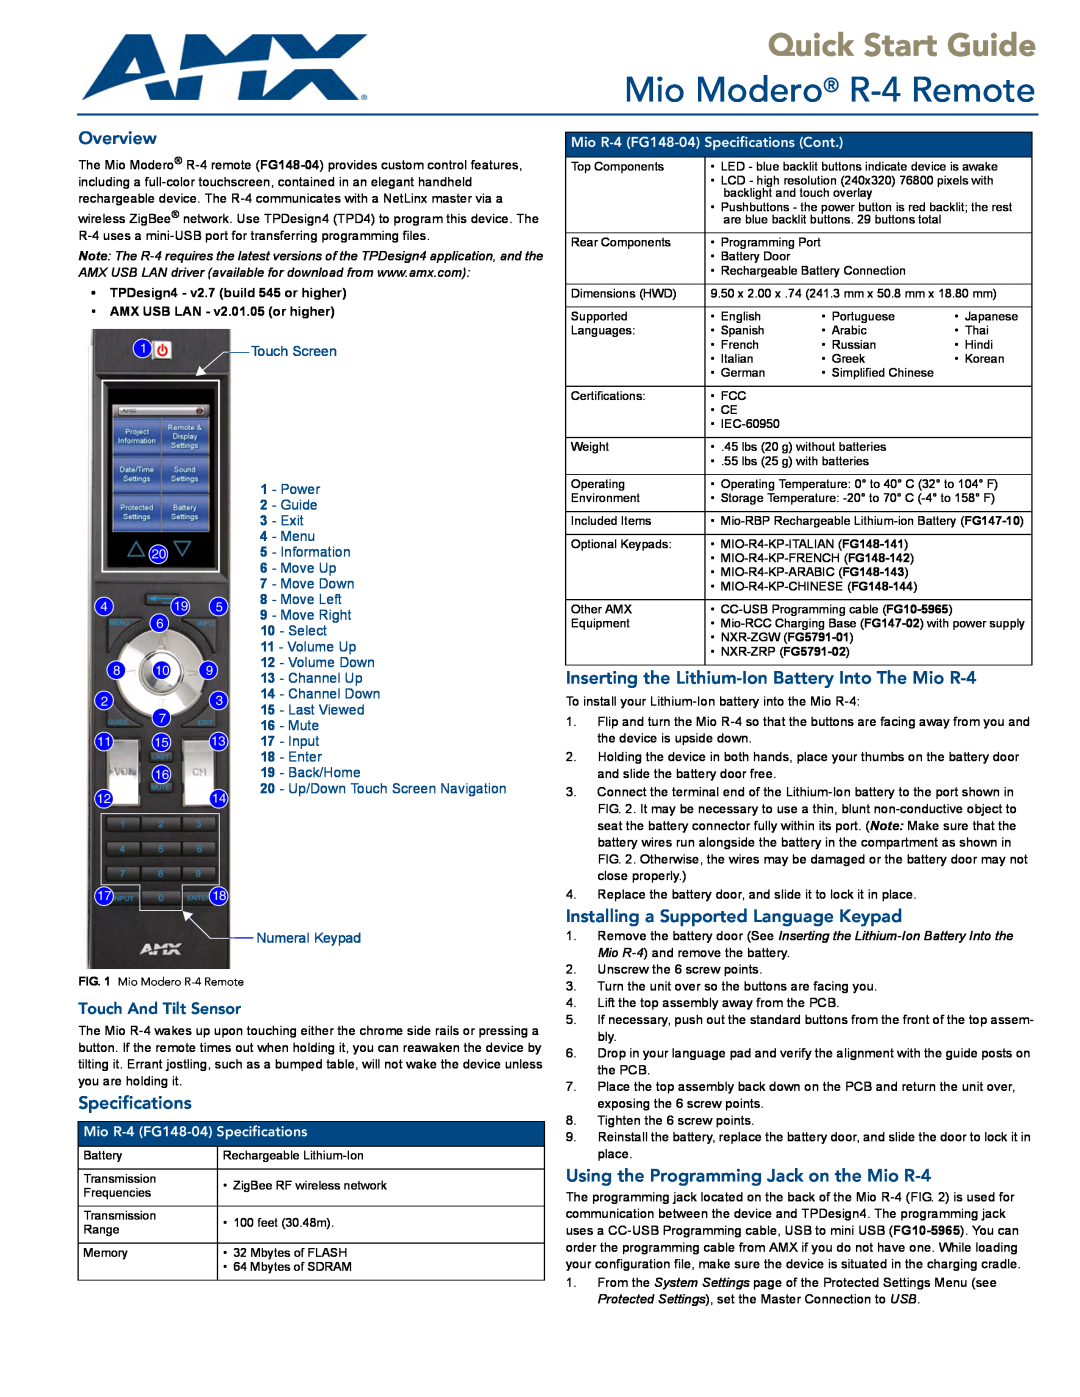 AMX FG148-04 quick start Overview, Specifications, Inserting the Lithium-Ion Battery Into The Mio R-4, Move Down, Select 